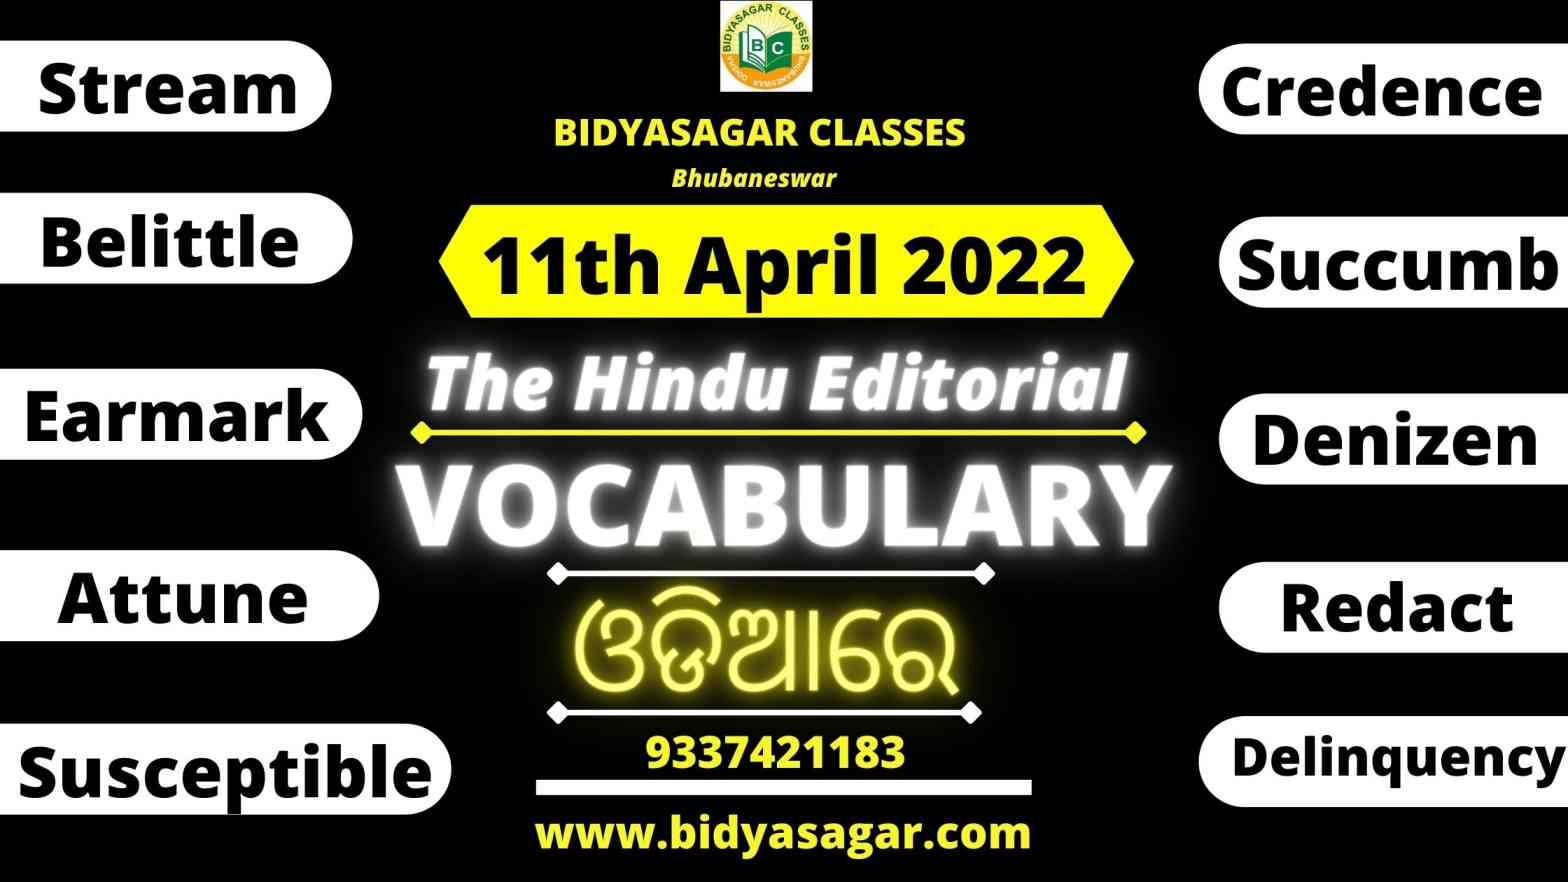 The Hindu Editorial Vocabulary of 11th April 2022